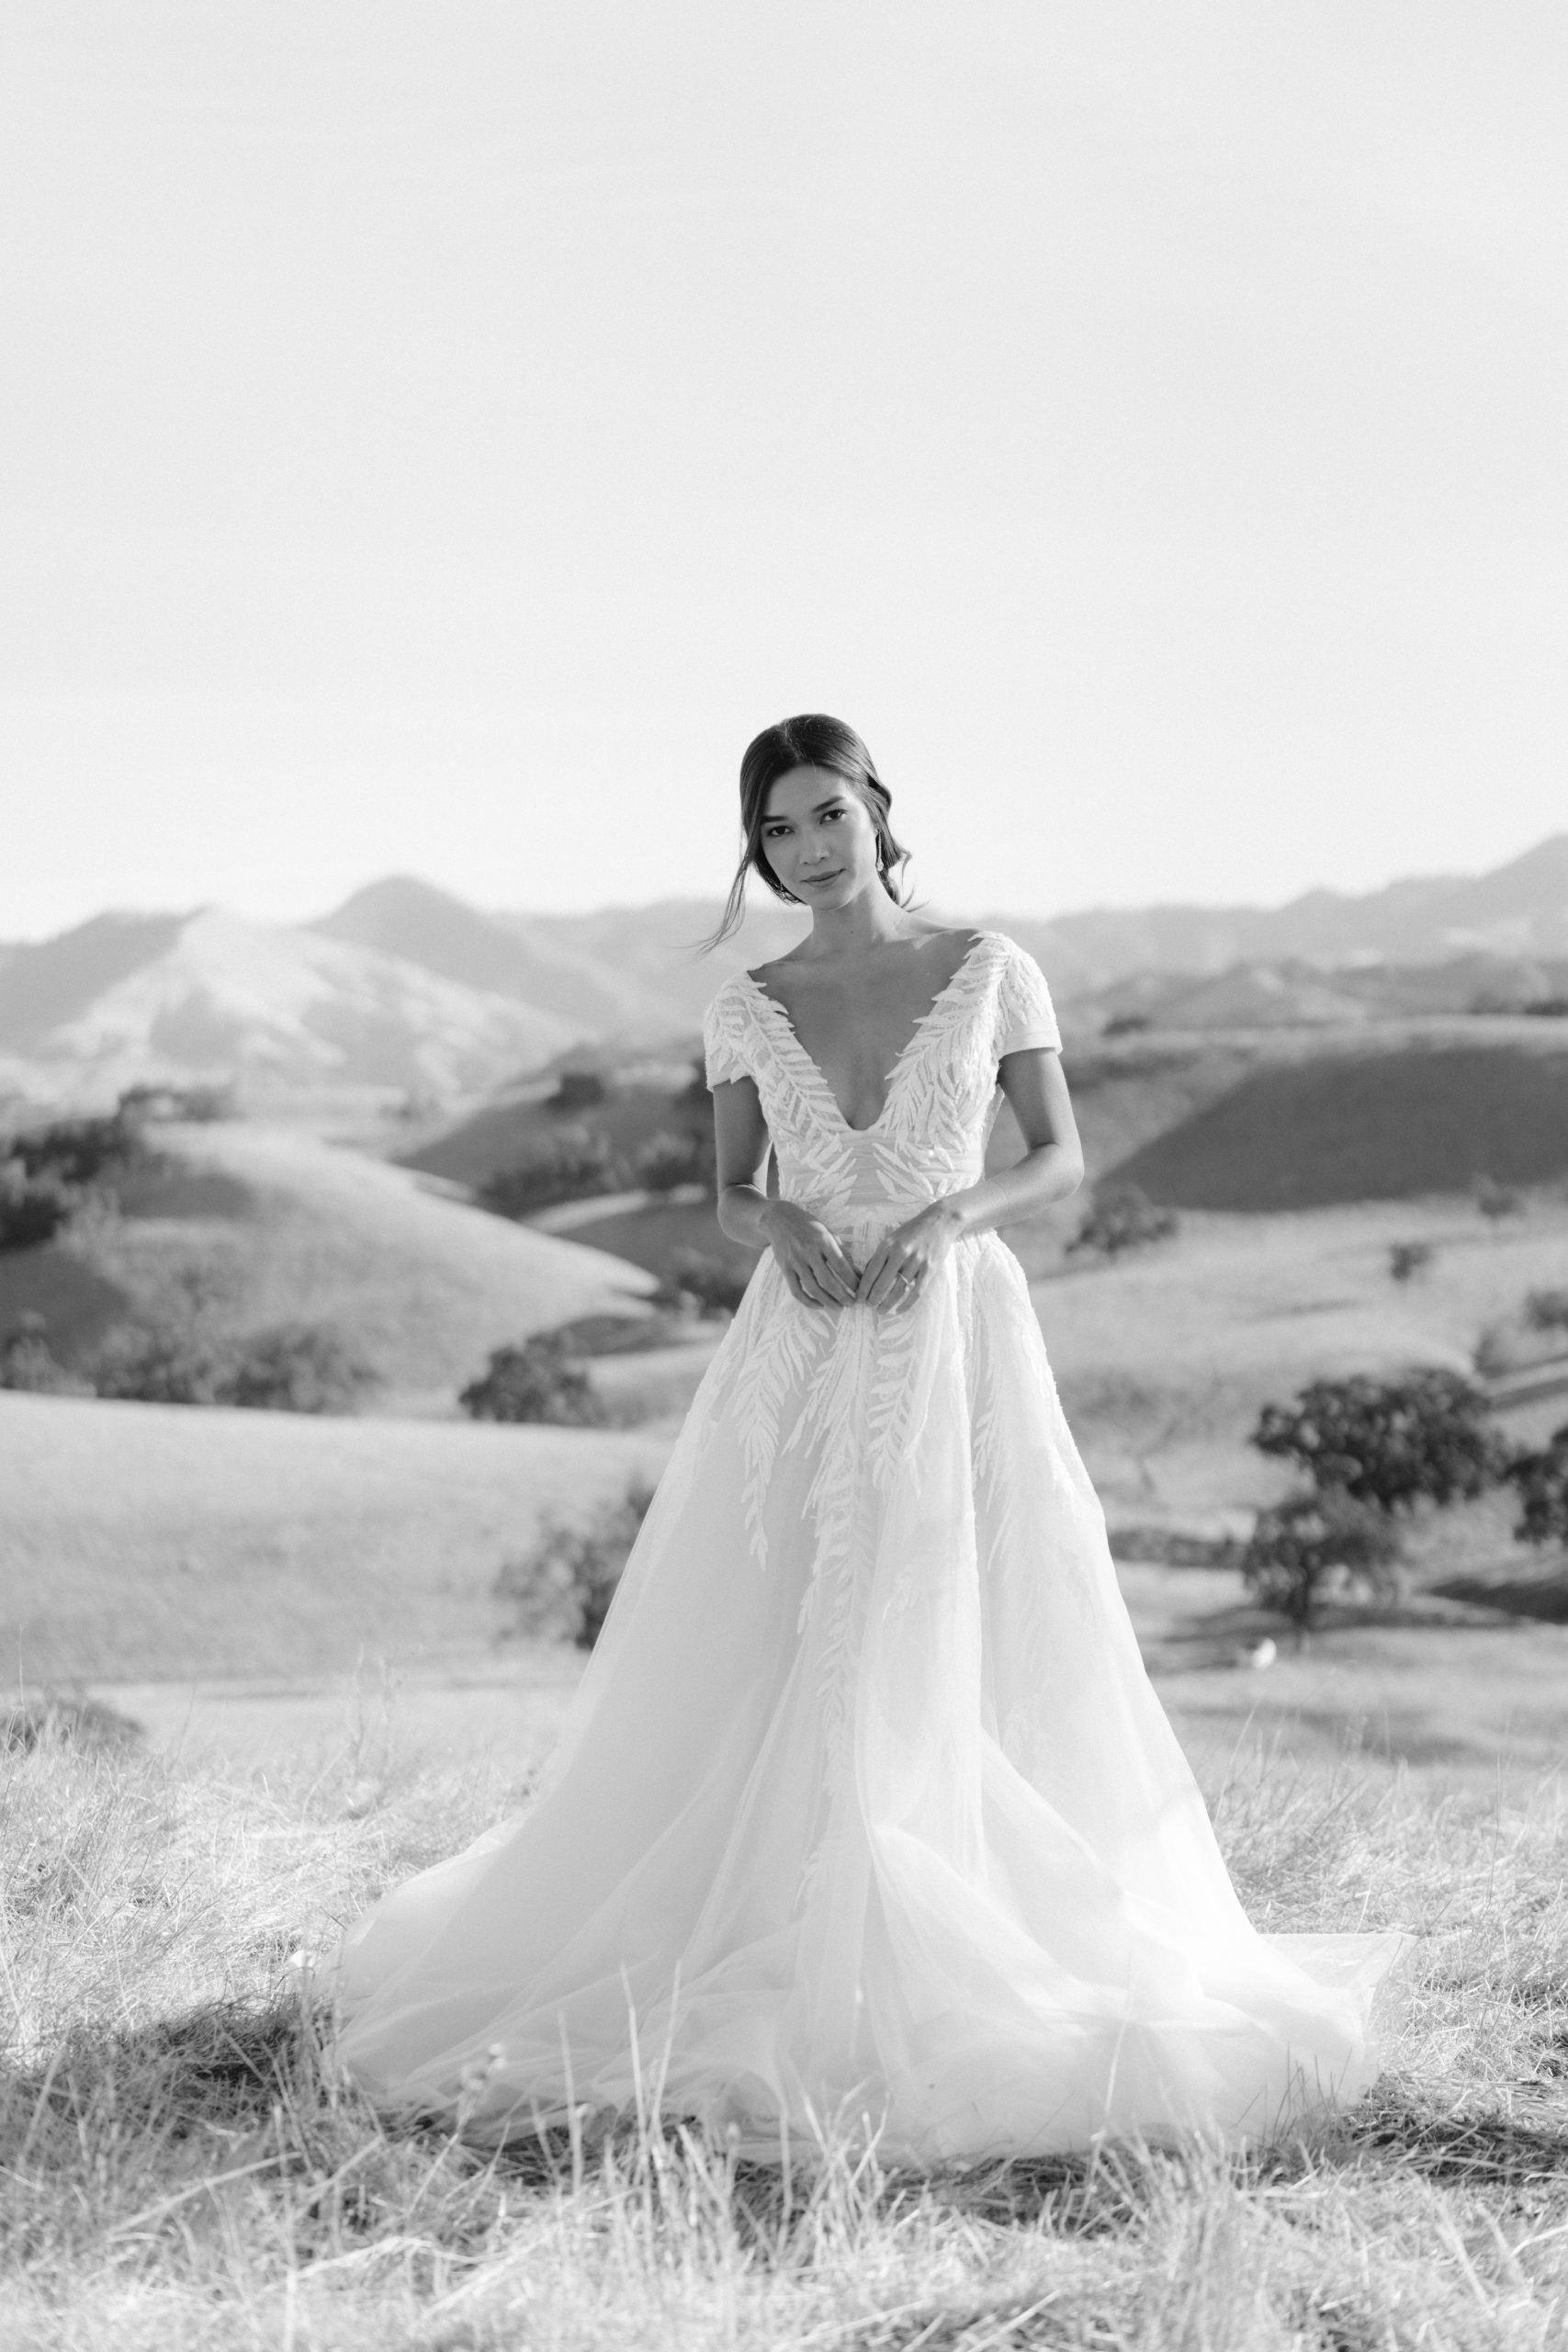 How to Find the Best Wedding Dress for Your Body Shape